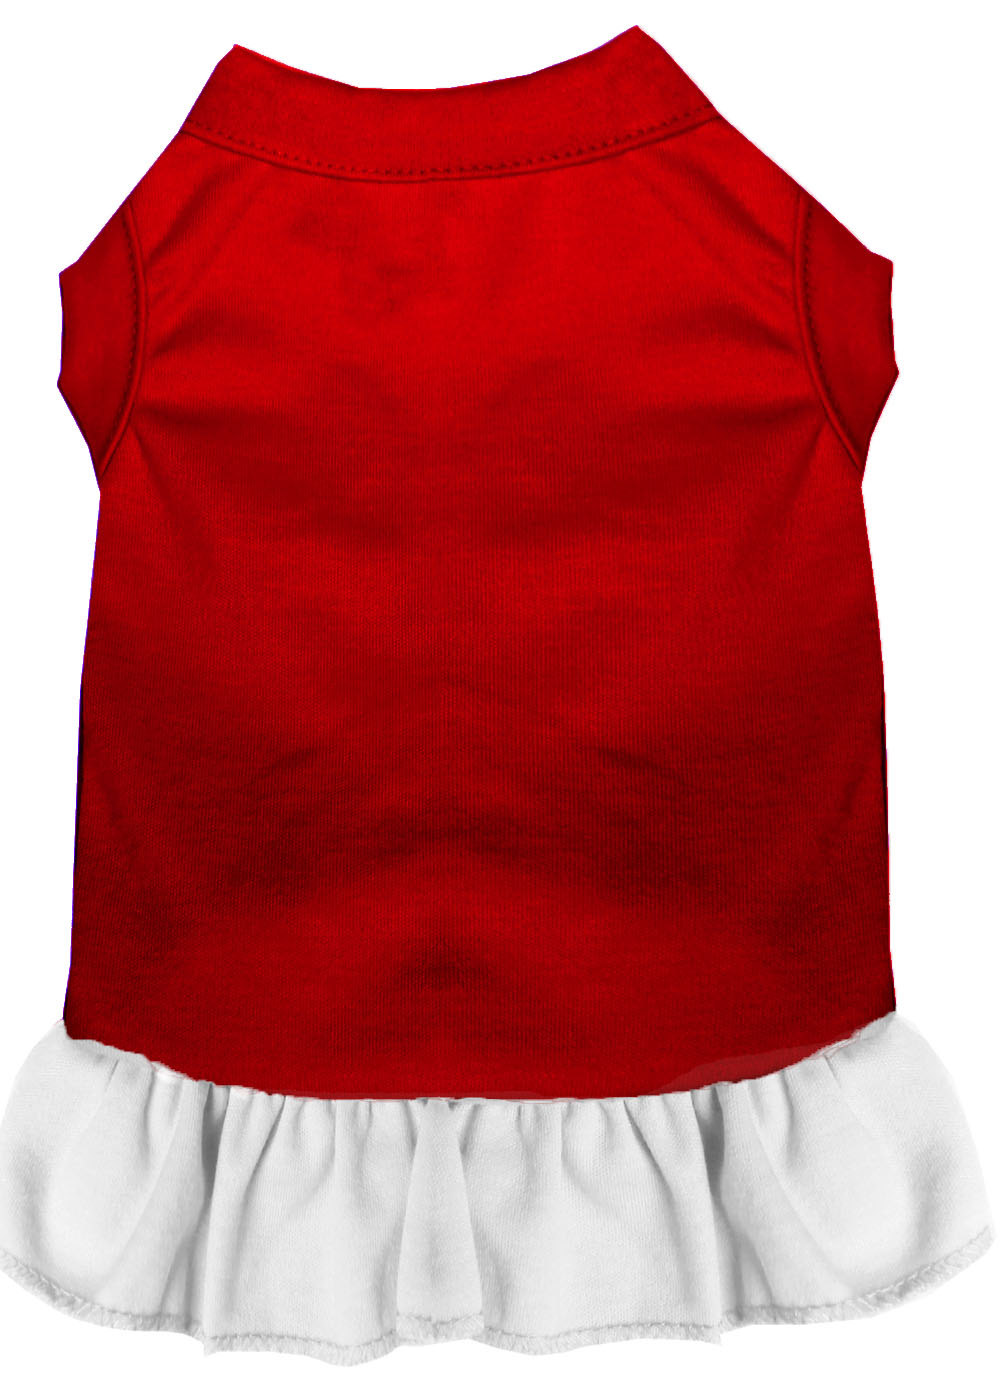 Plain Pet Dress Red with White Sm